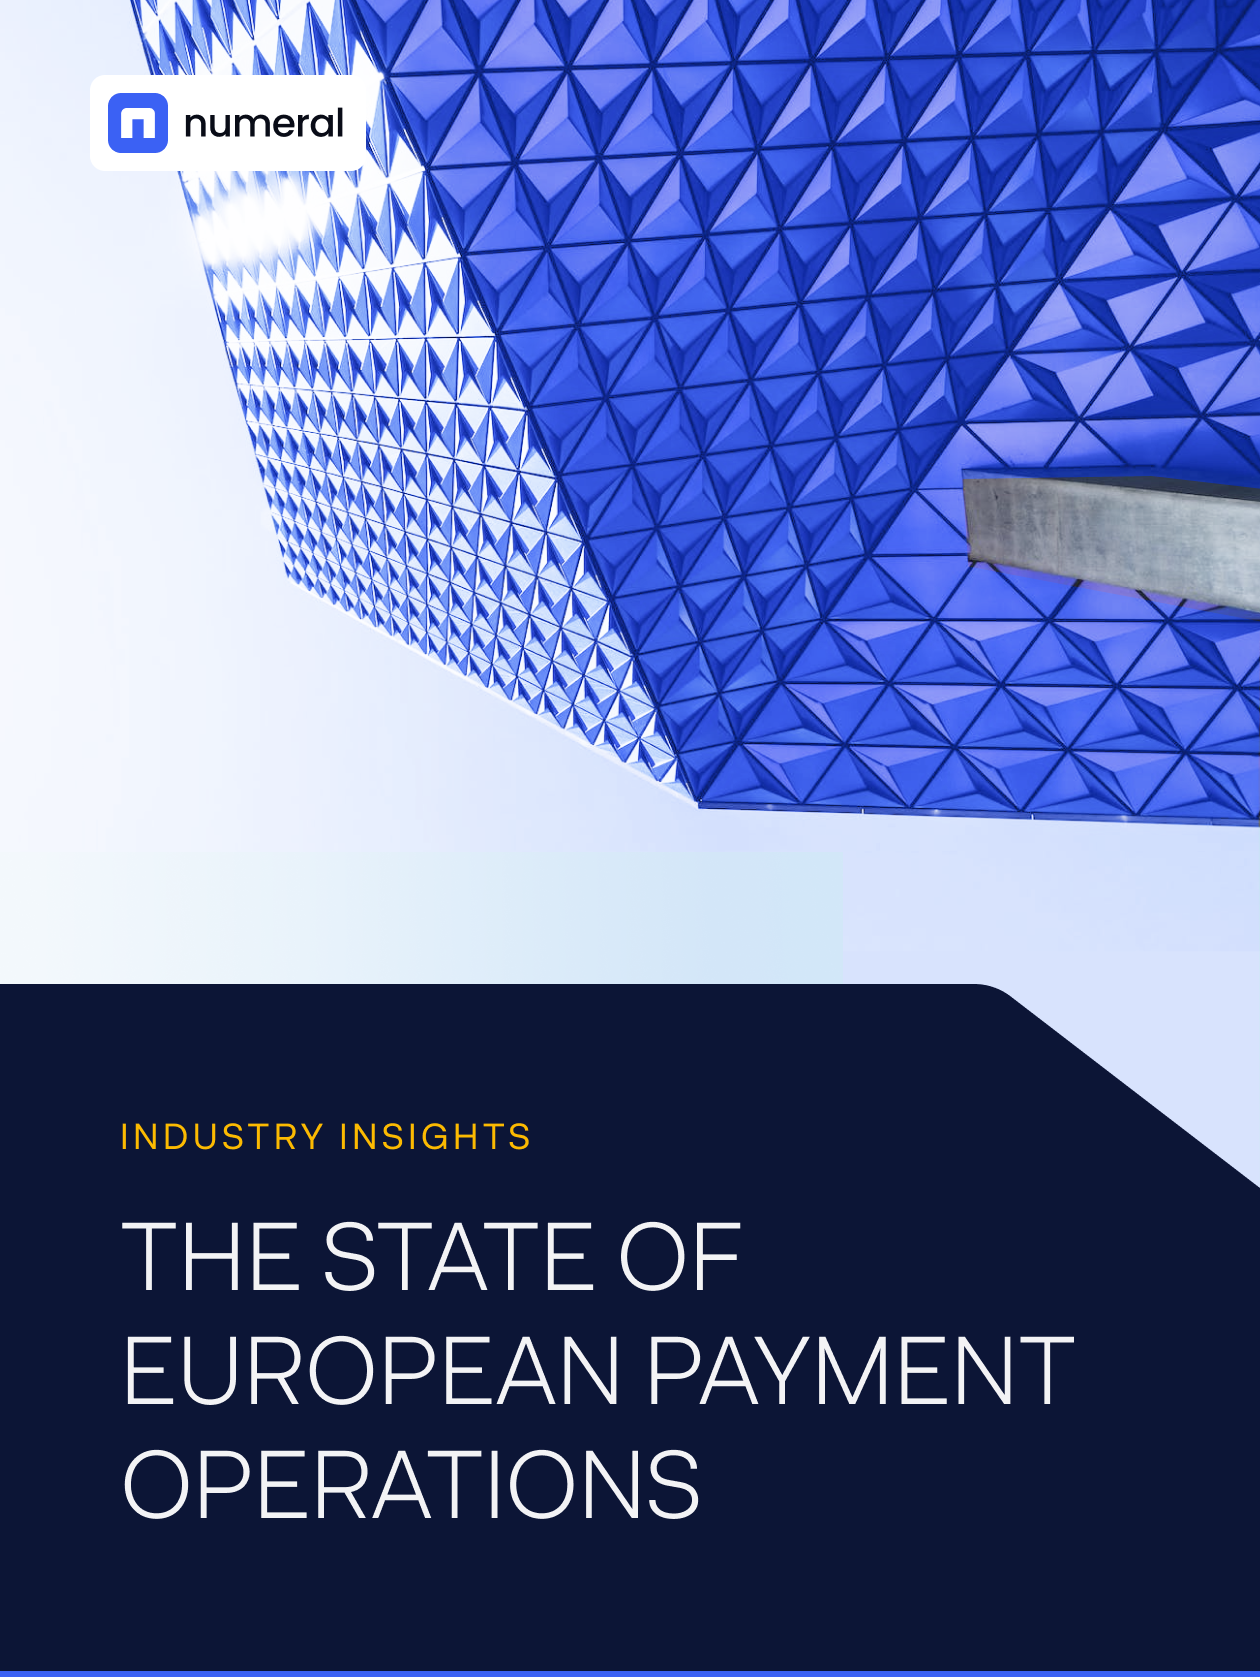 The state of European payement operations